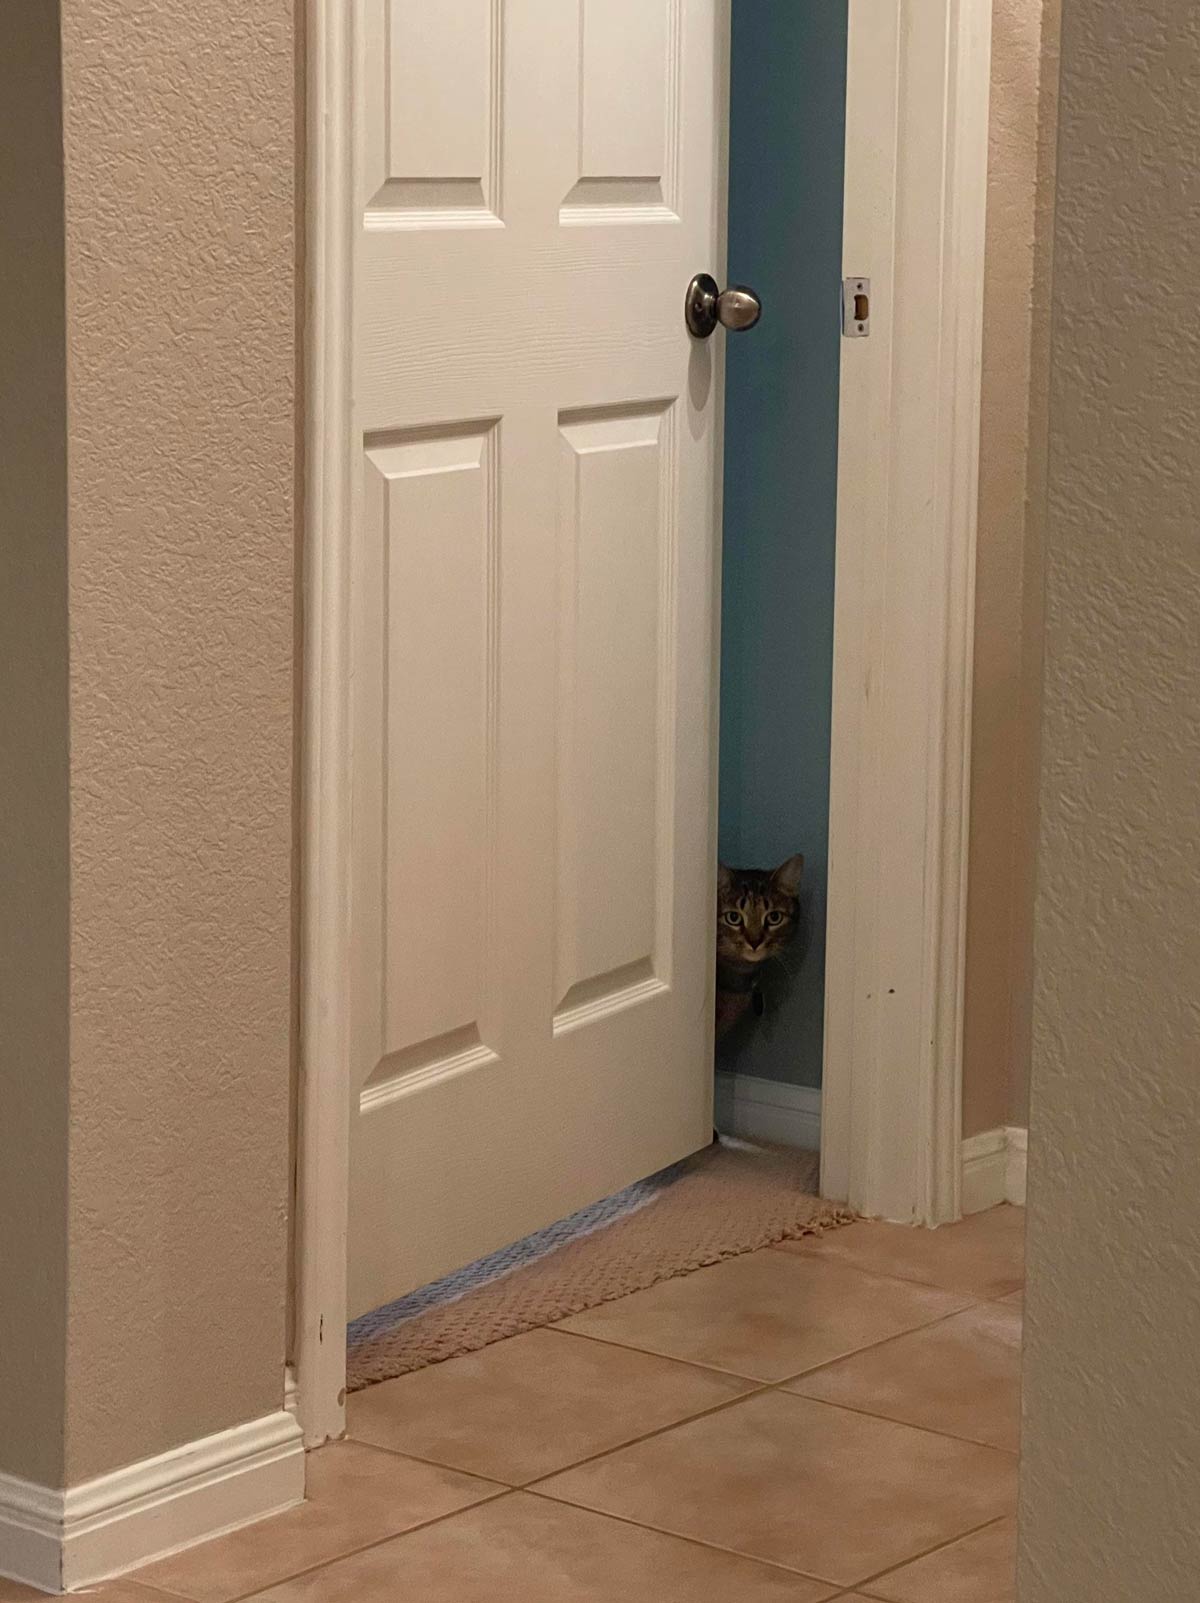 My friend’s cat, who hates people, waiting for us to leave